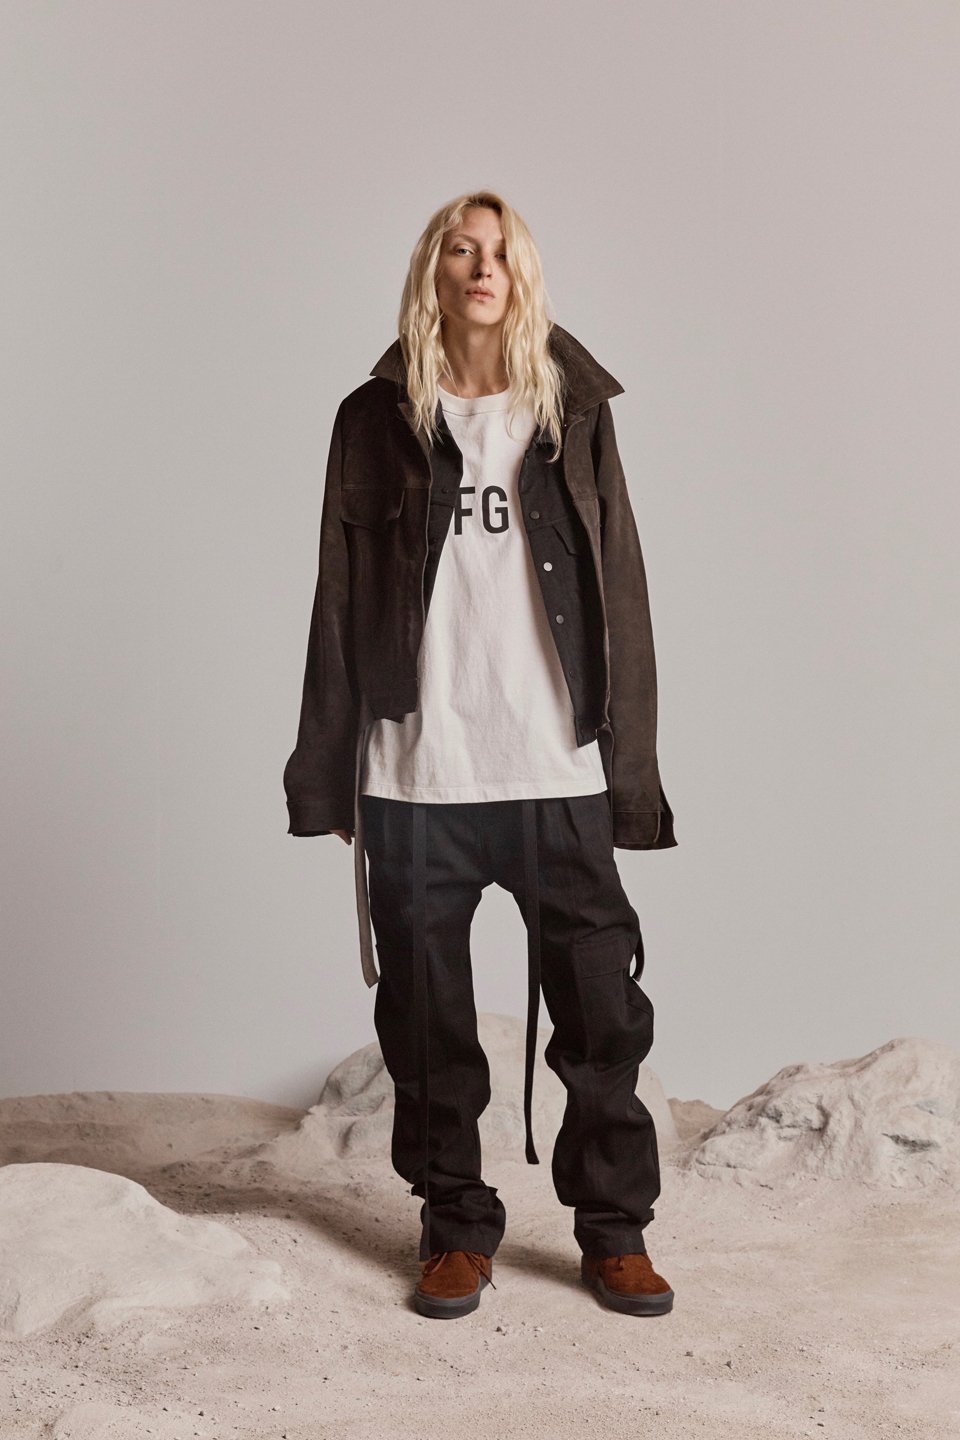 fear of god sixth collection | nate-hospital.com